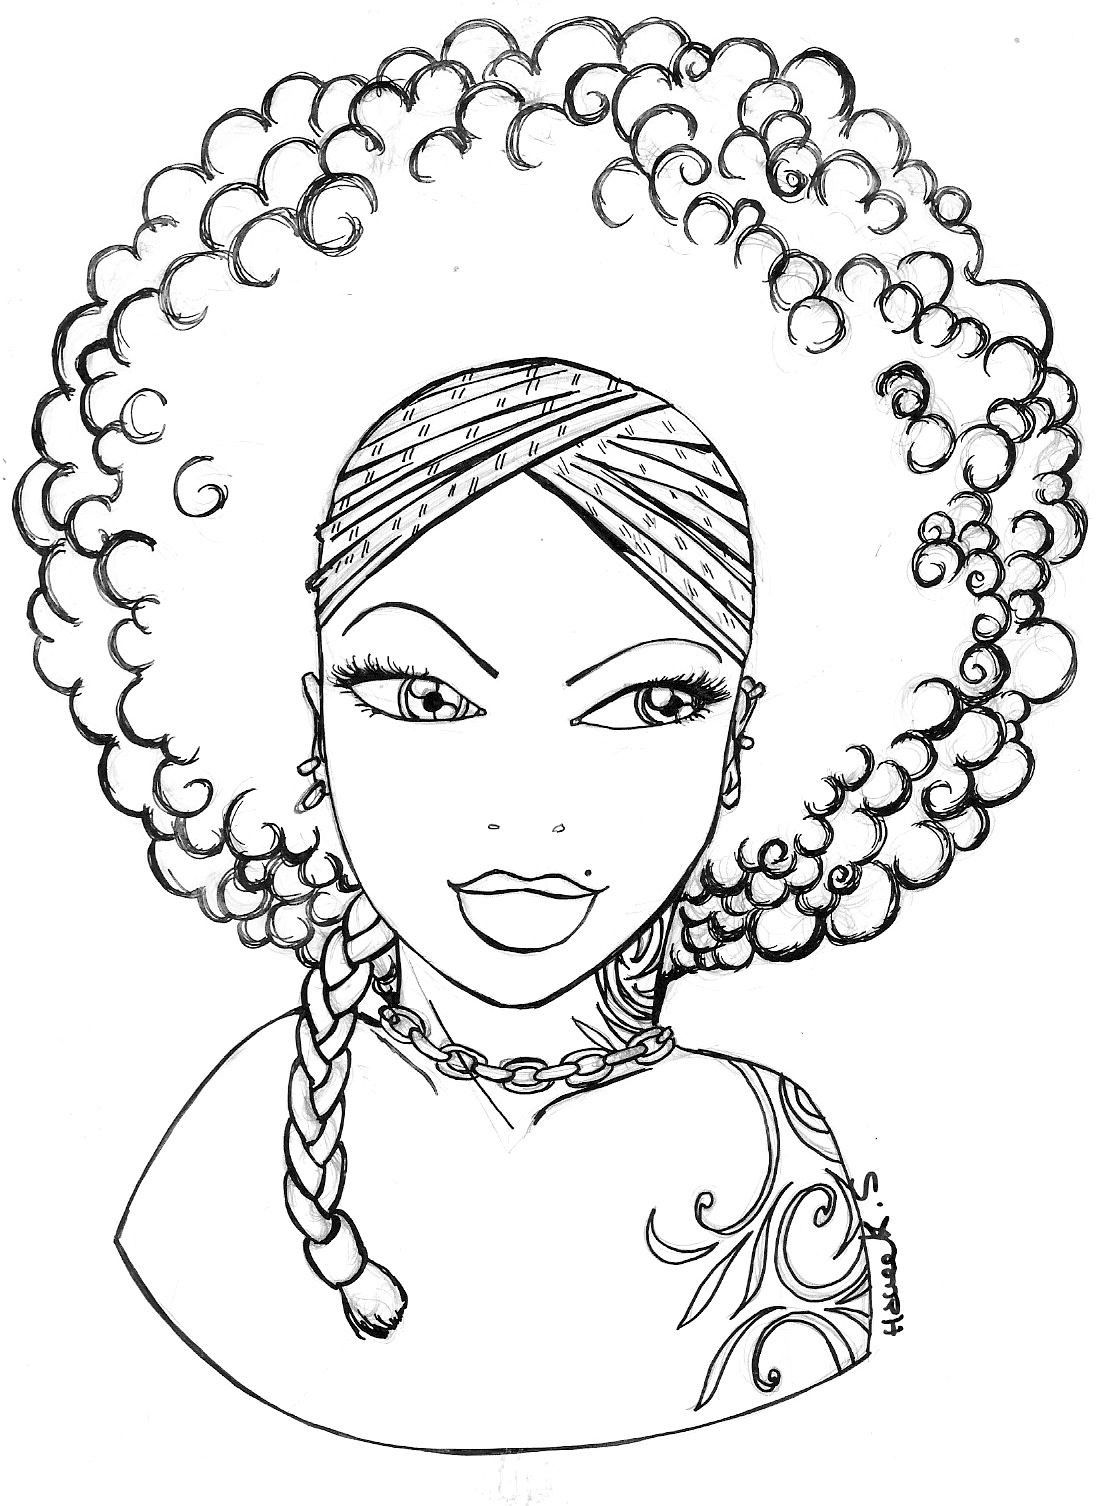 The Best Ideas for Coloring Pages for Black Girls - Best Coloring Pages  Inspiration and Ideas | Coloring pages for girls, Coloring pages, Coloring  books